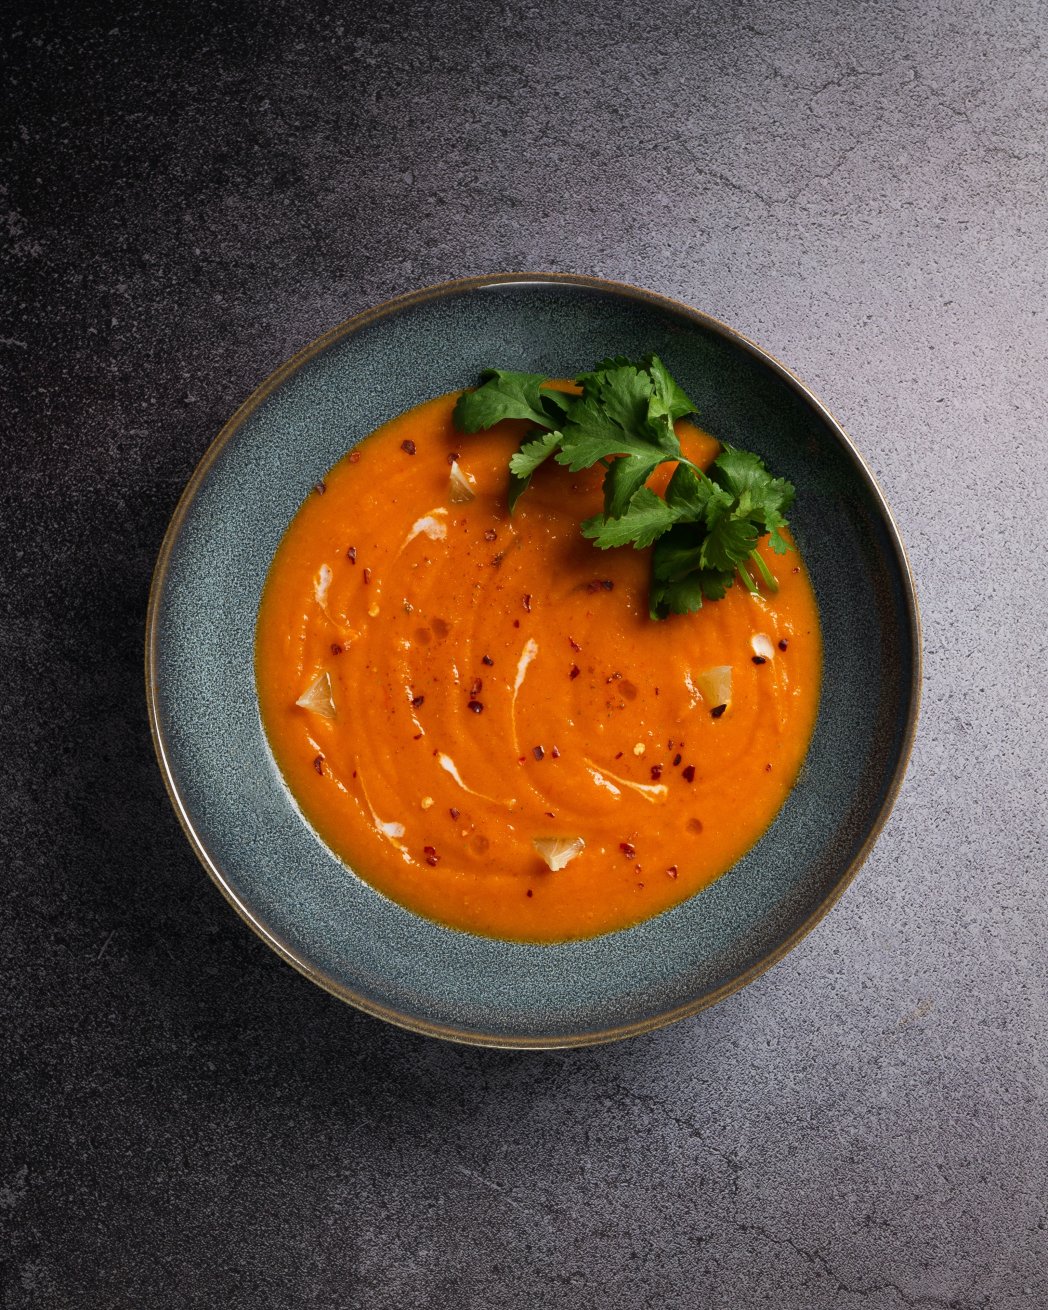 Tomato soup with chili